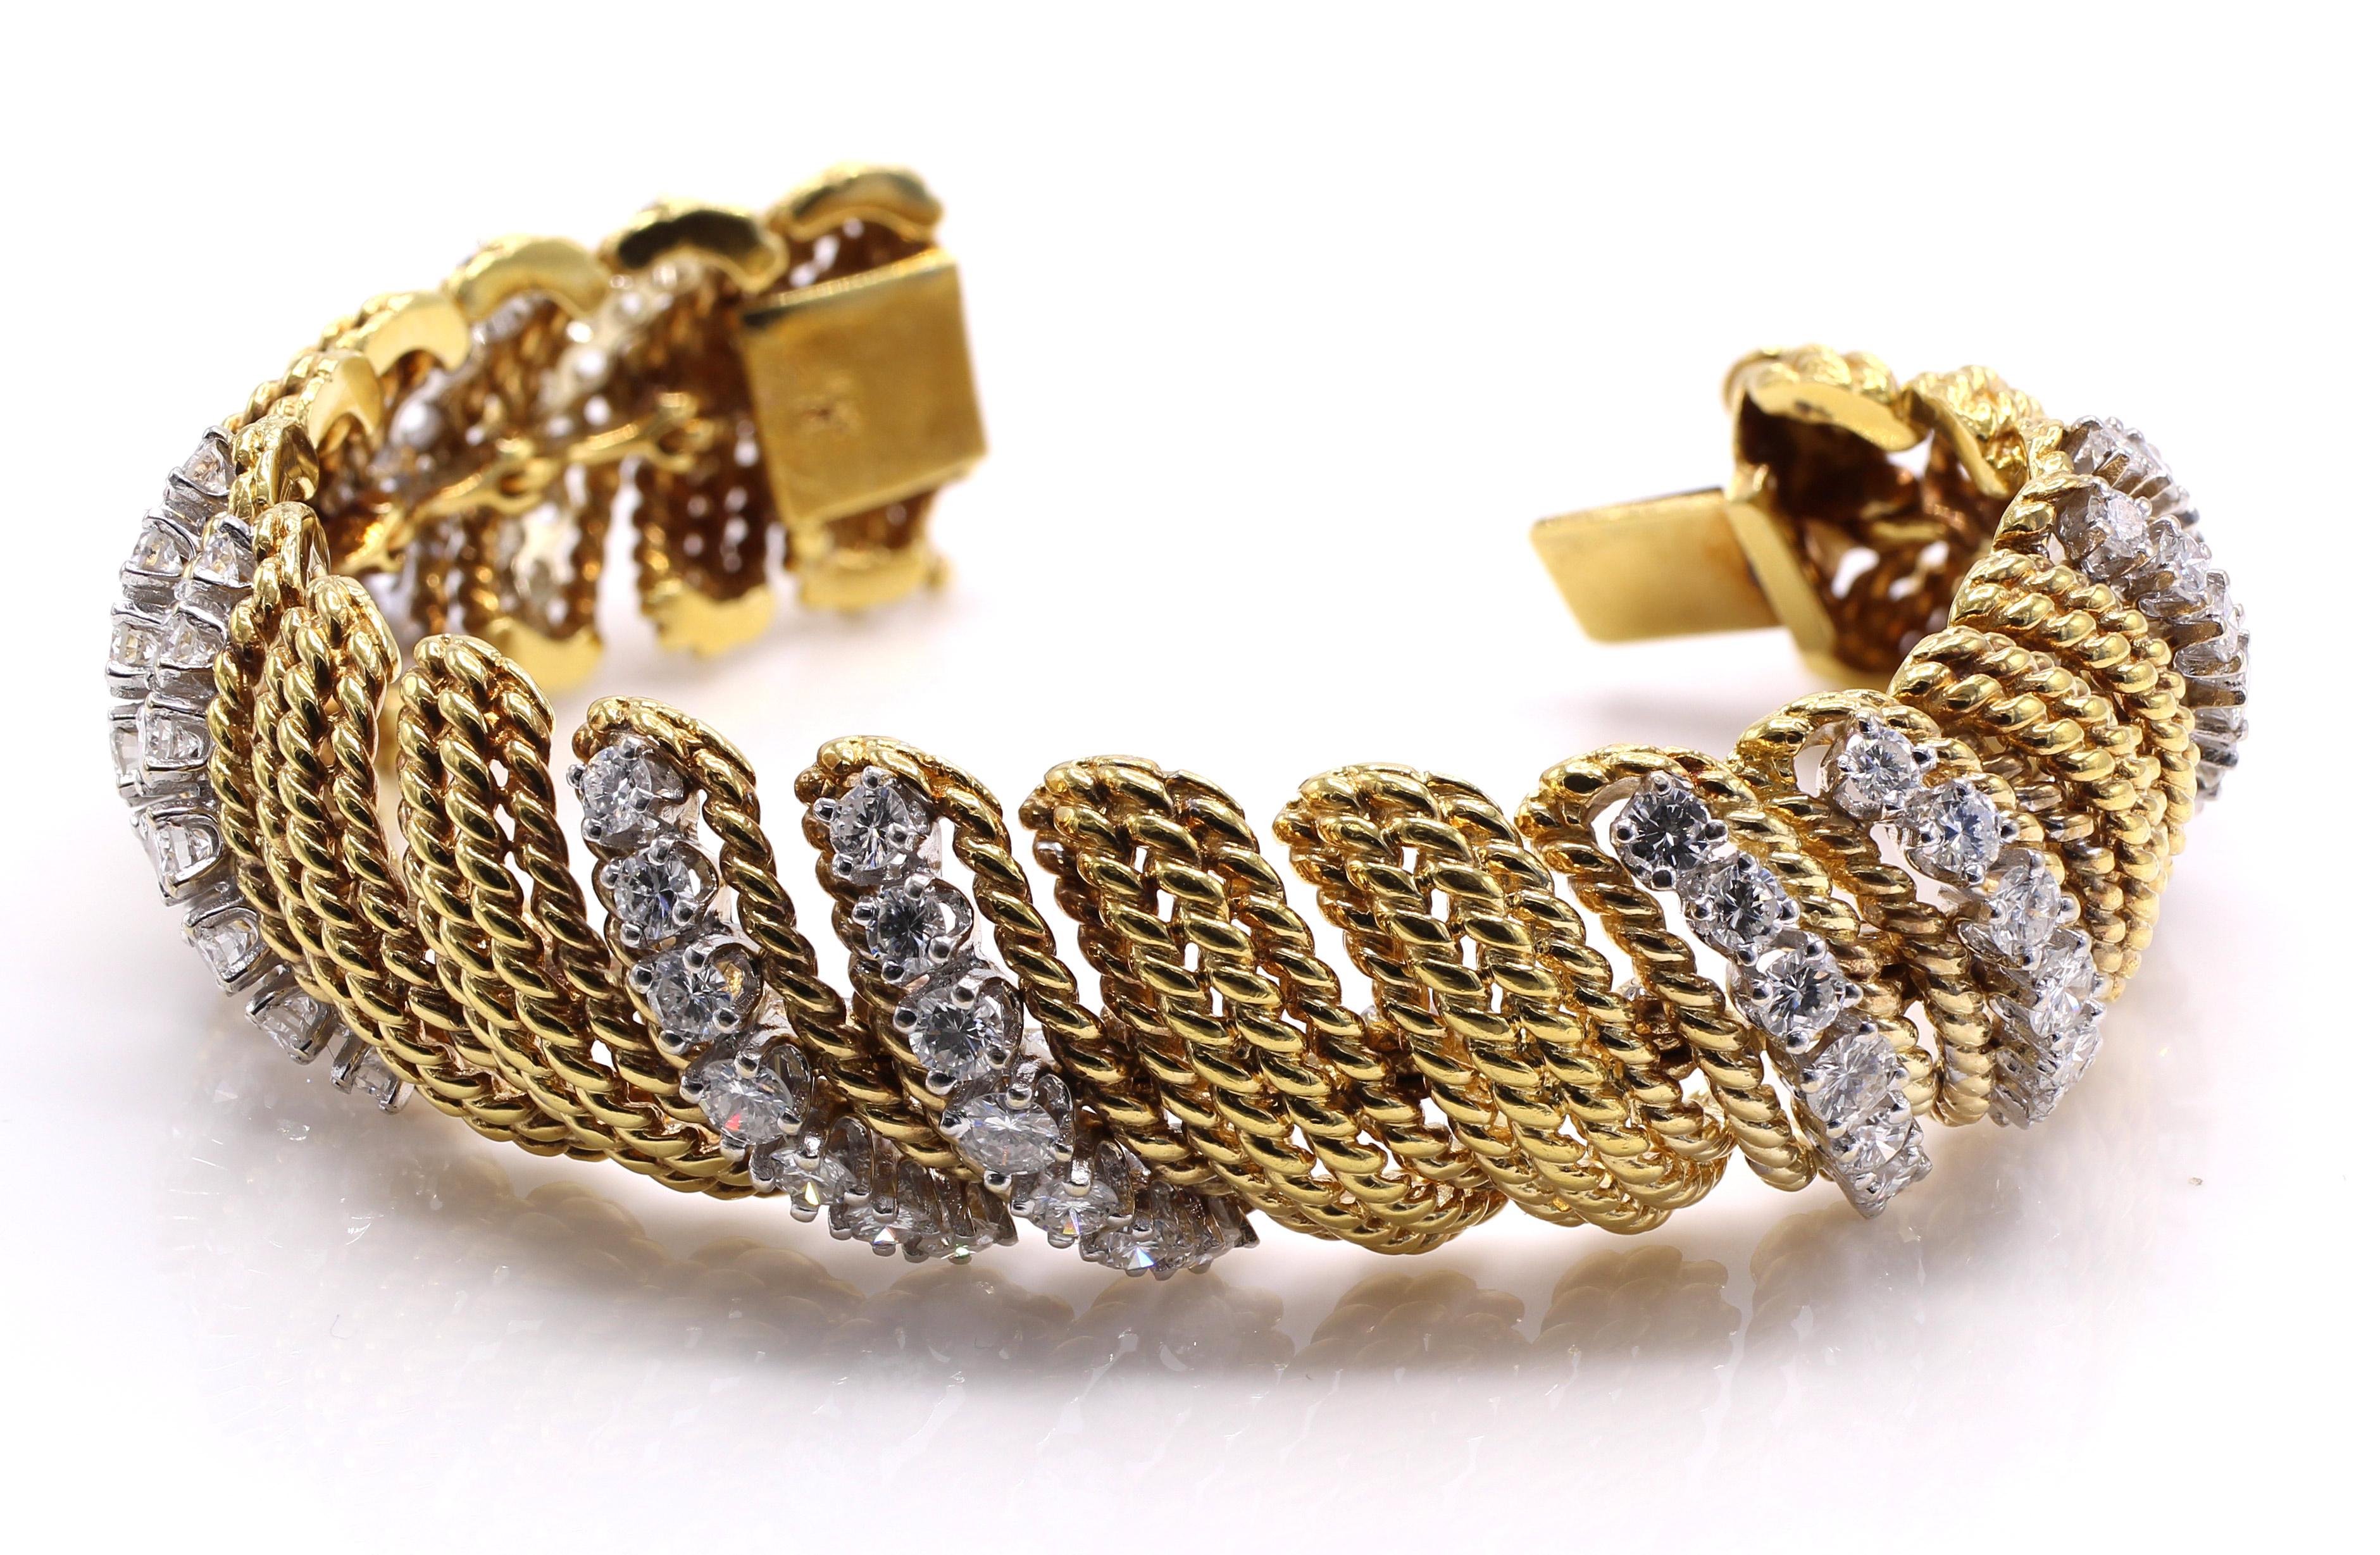 Beautifully designed and masterfully handcrafted in 18 karat yellow gold bracelet ca. 1960. 6 sections of curved textured gold links are intersected by 5 sections of double rows set with bright white and sparkly perfectly matched brilliant cut